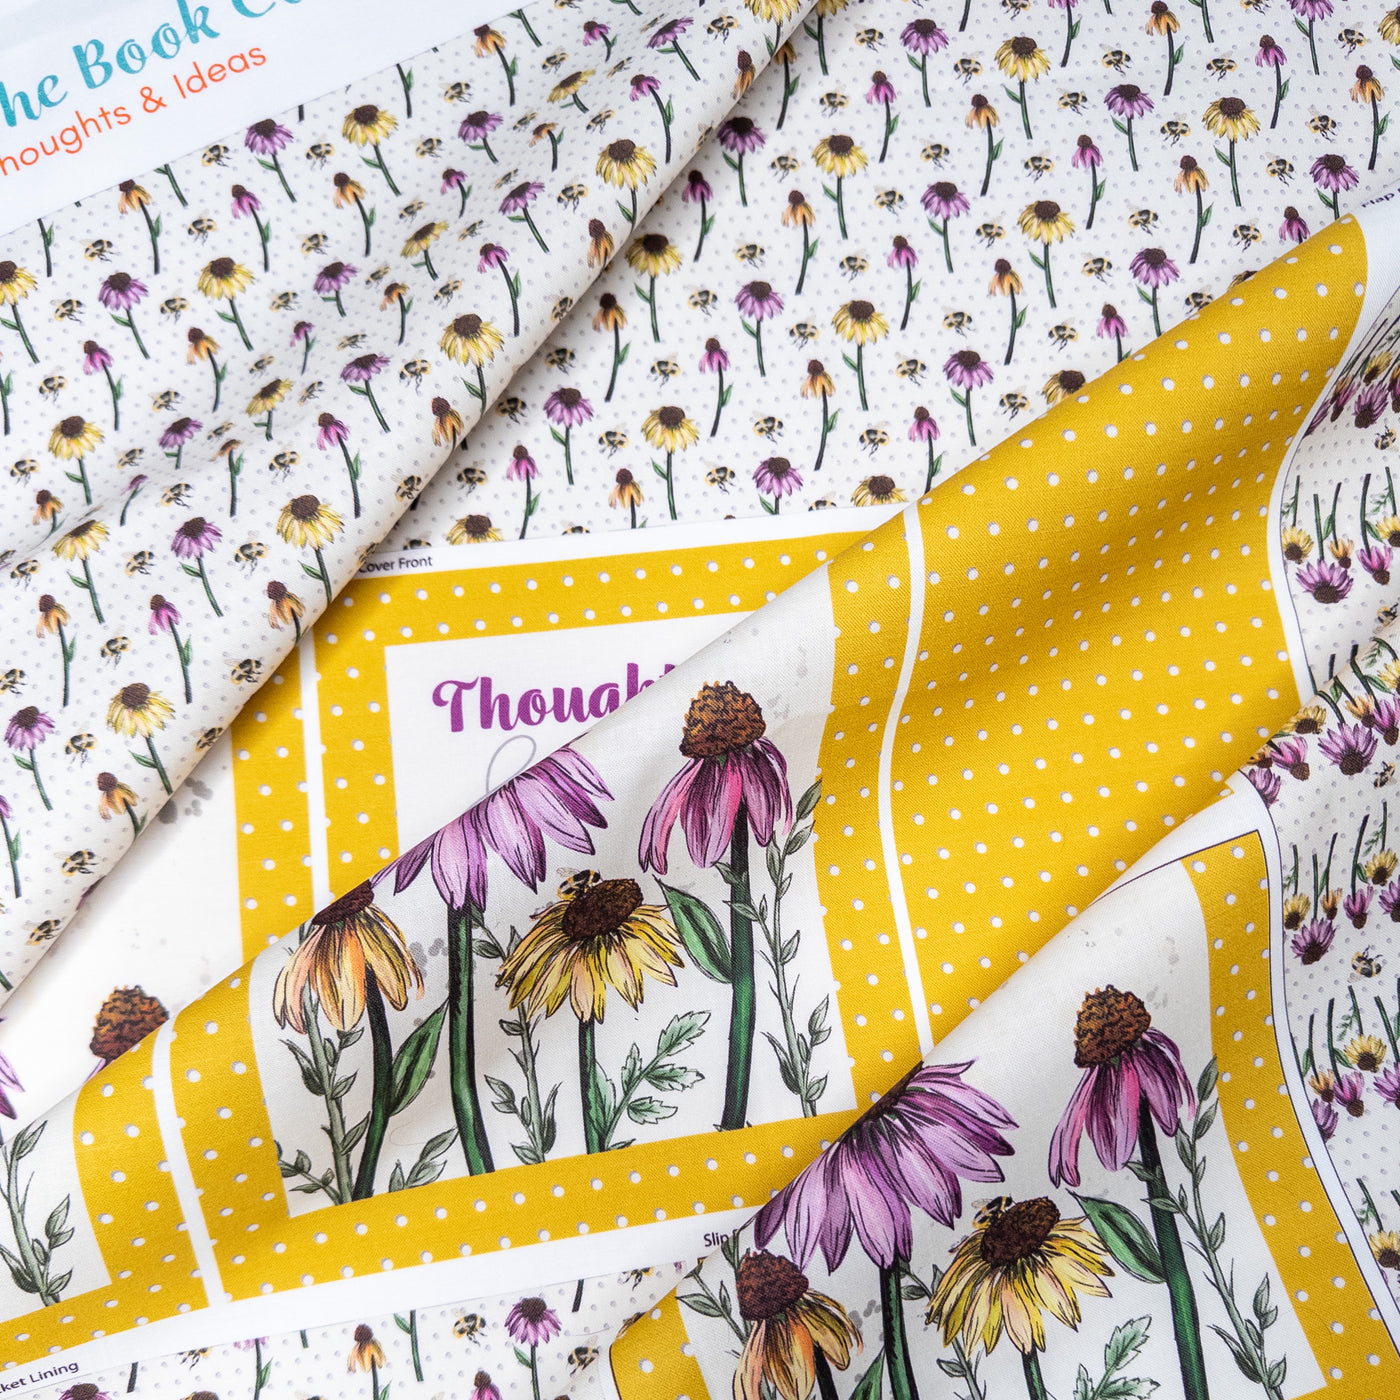 Notebook Cover Sewing Kit - Thoughts and Ideas floral Notebook Cover Cut and Sew Fabric Panel Amber Makes